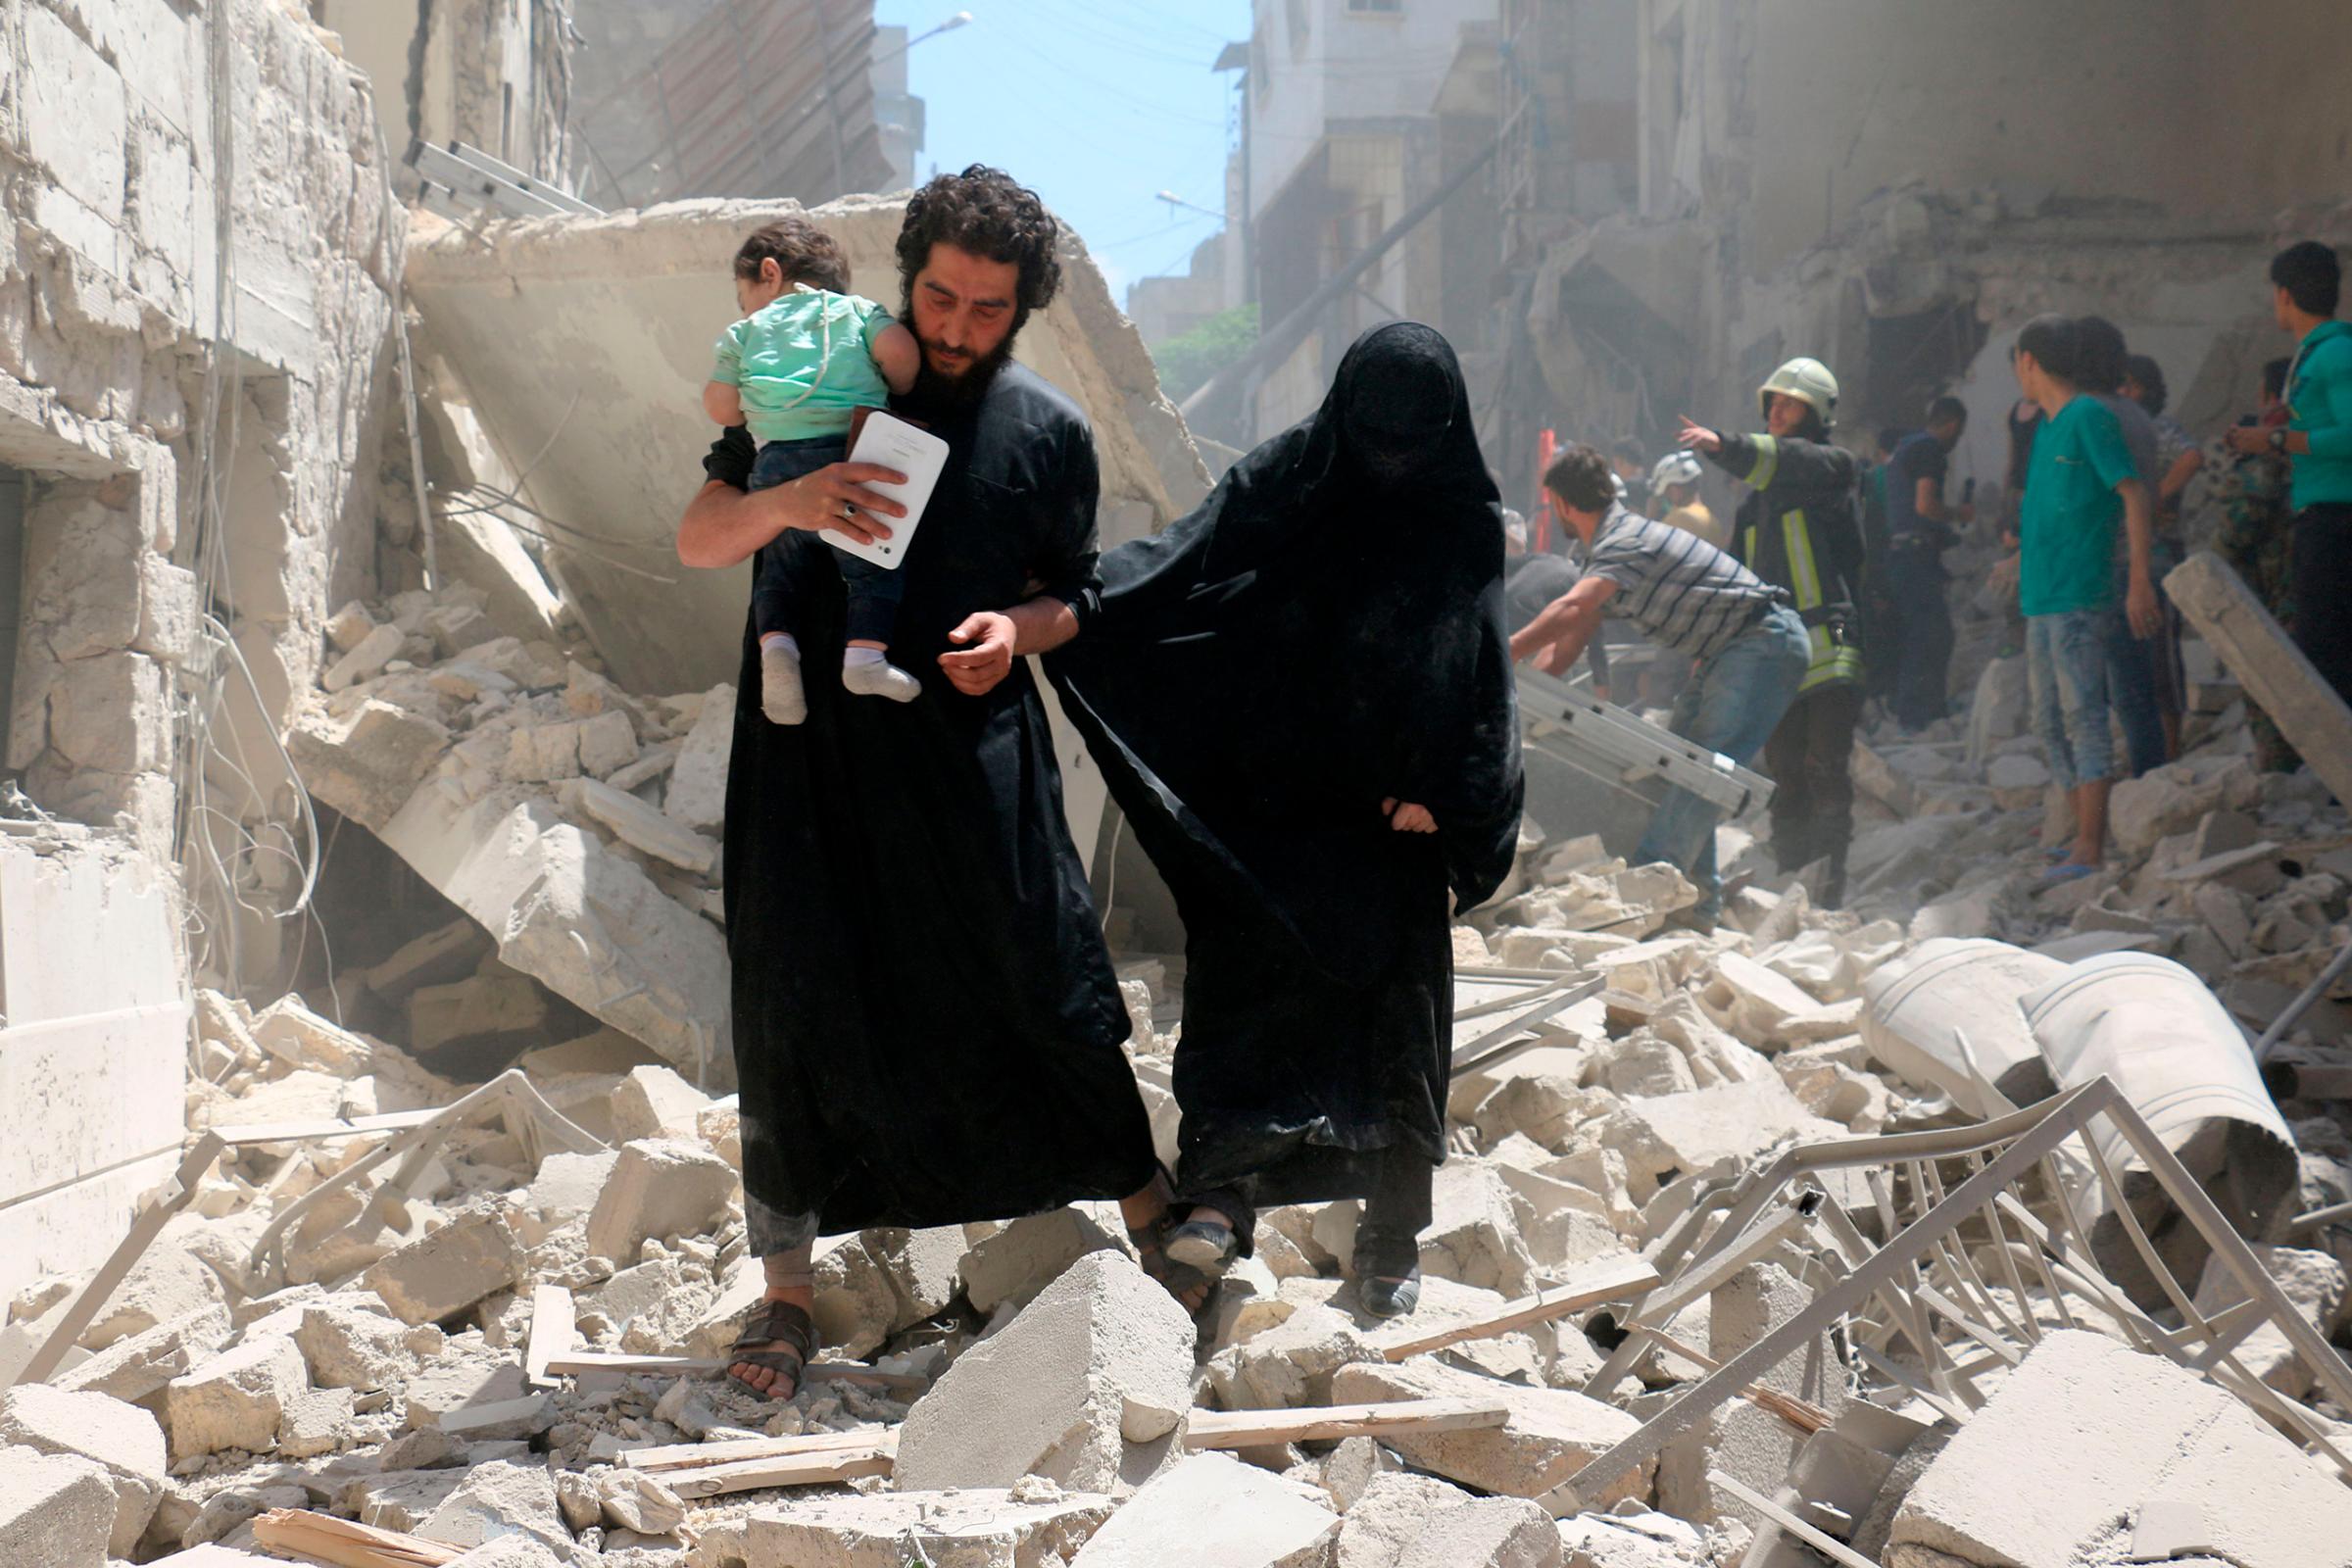 A family walks amid the rubble of destroyed buildings following a reported airstrike on a rebel-held neighborhood in Aleppo, Syria, April 28, 2016.